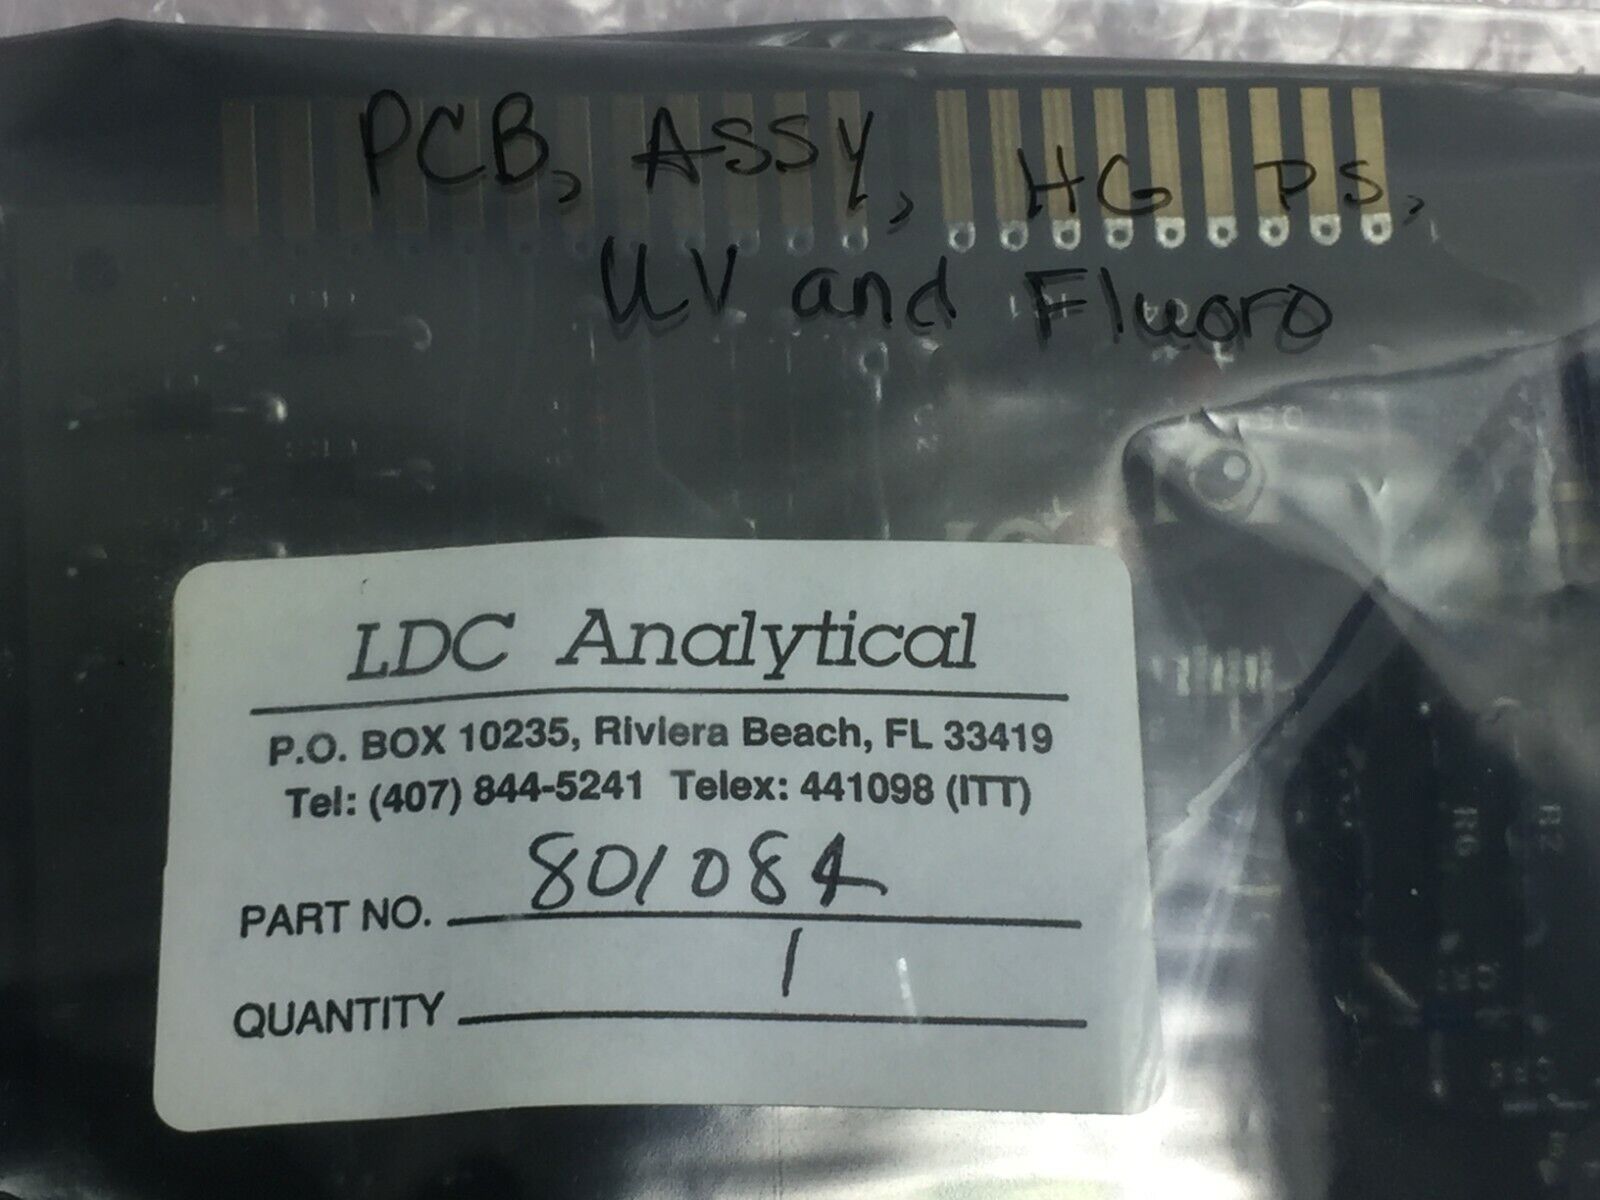 LDC Analytical  Part# 801084 PCB Assy HG PS UV and Fluoro